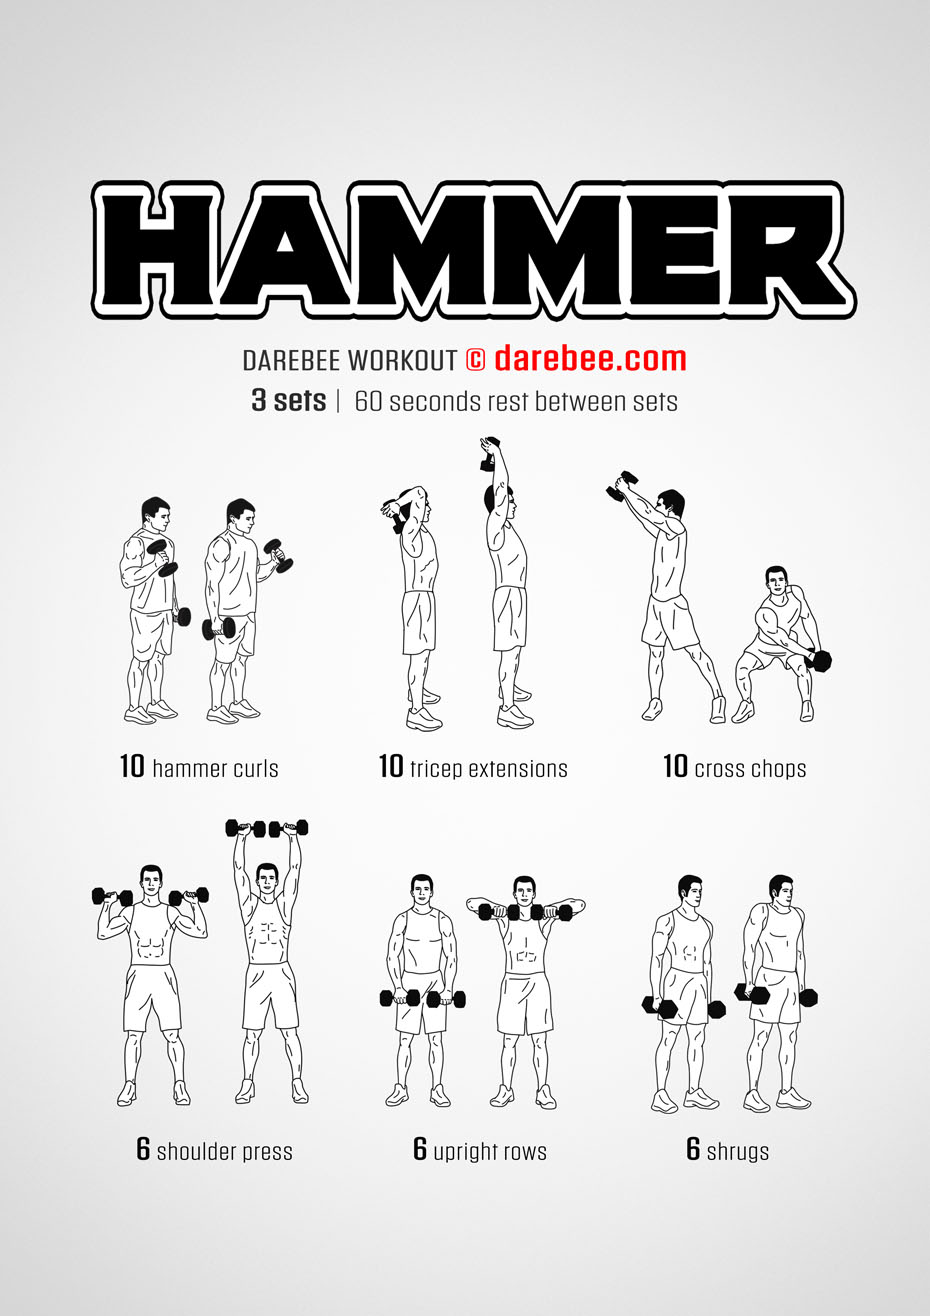 30 Minute Arm Exercise Routine With Dumbbells for Fat Body